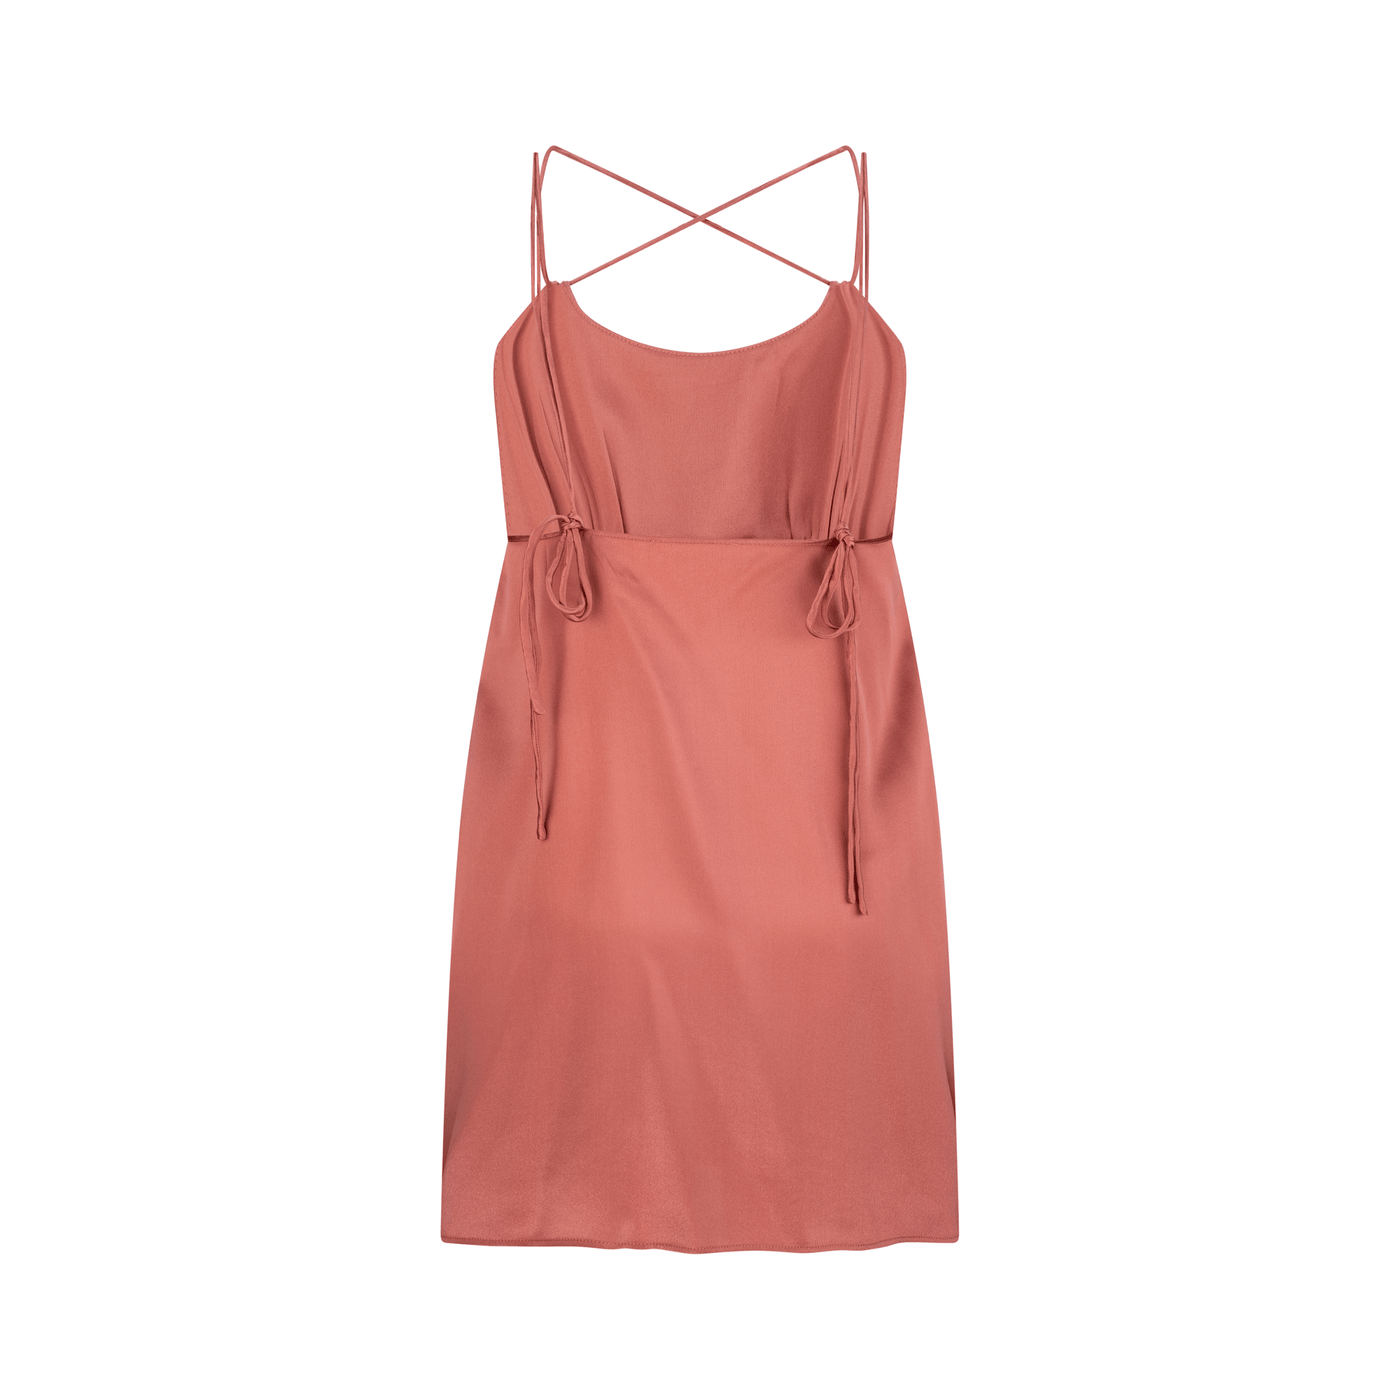 Lilly Pilly Collection bluesign® certified silk Ella Slip in Dusty Pink, as a 3D image of back view